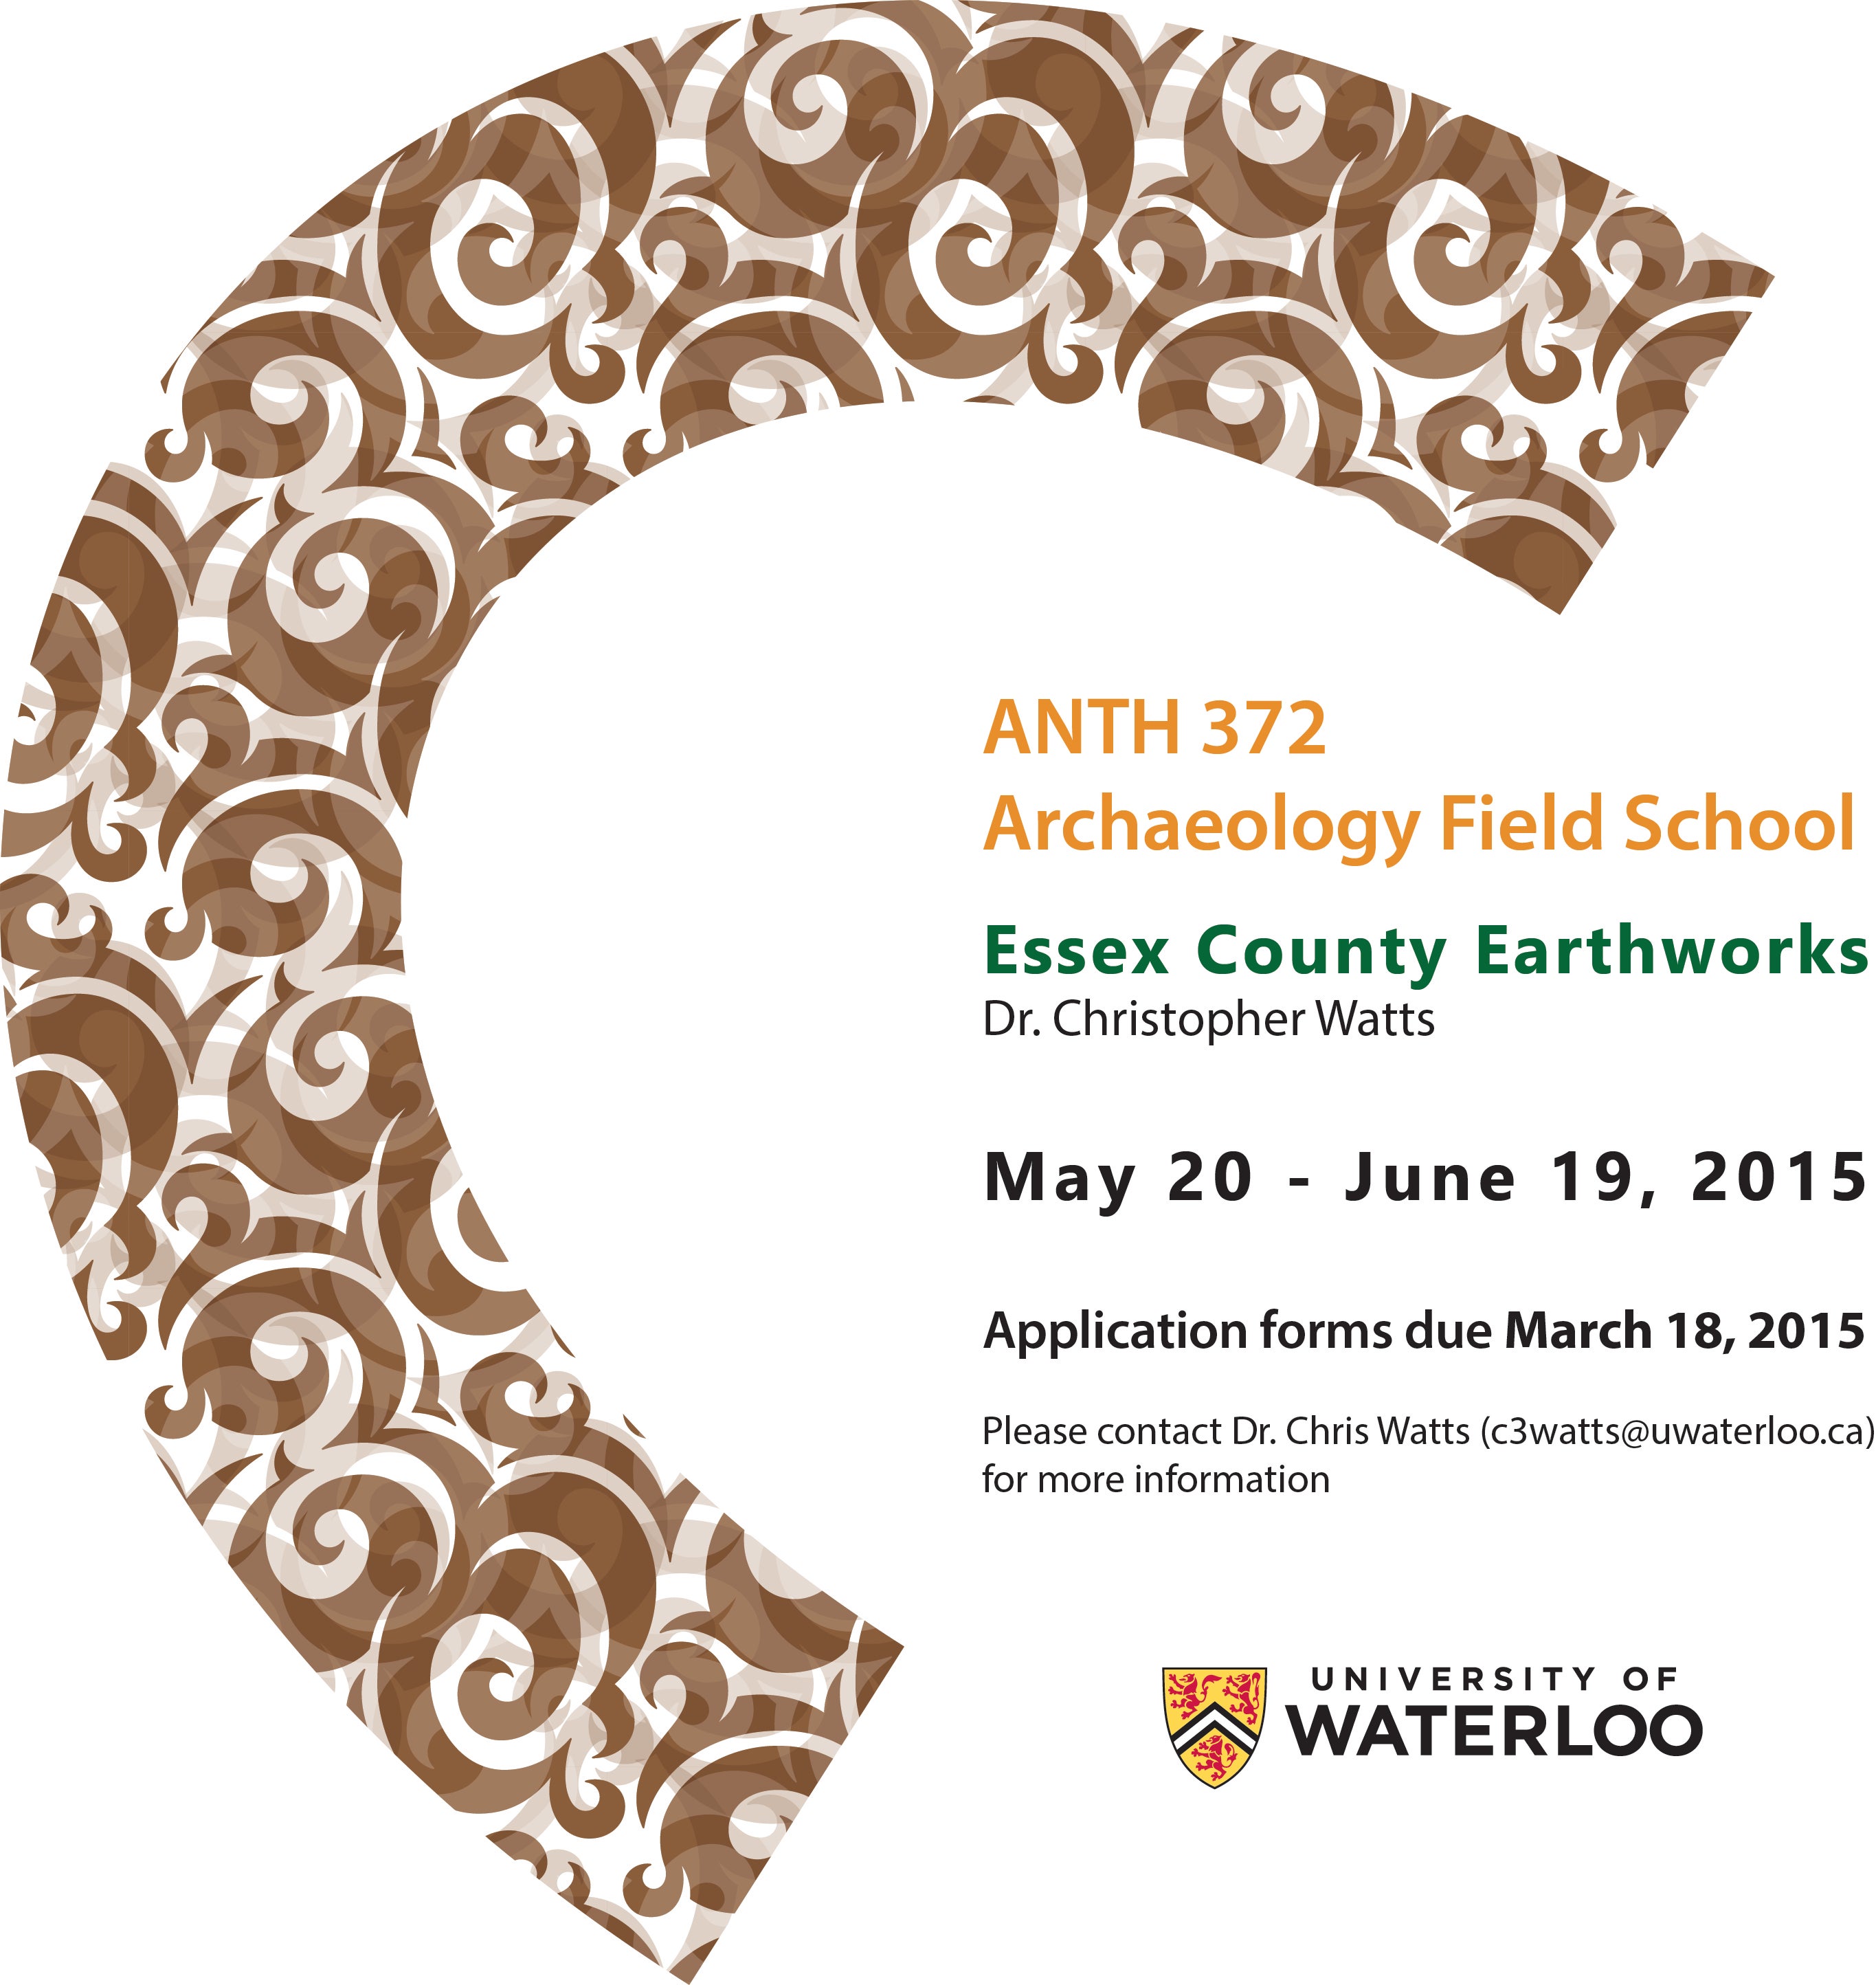 Anthropology 372 Archaeology field school: Taught by Dr. Christopher Watts from May 20 to June 19, 2015, at Essex County Earthworks. Application forms due March 18, 2015.